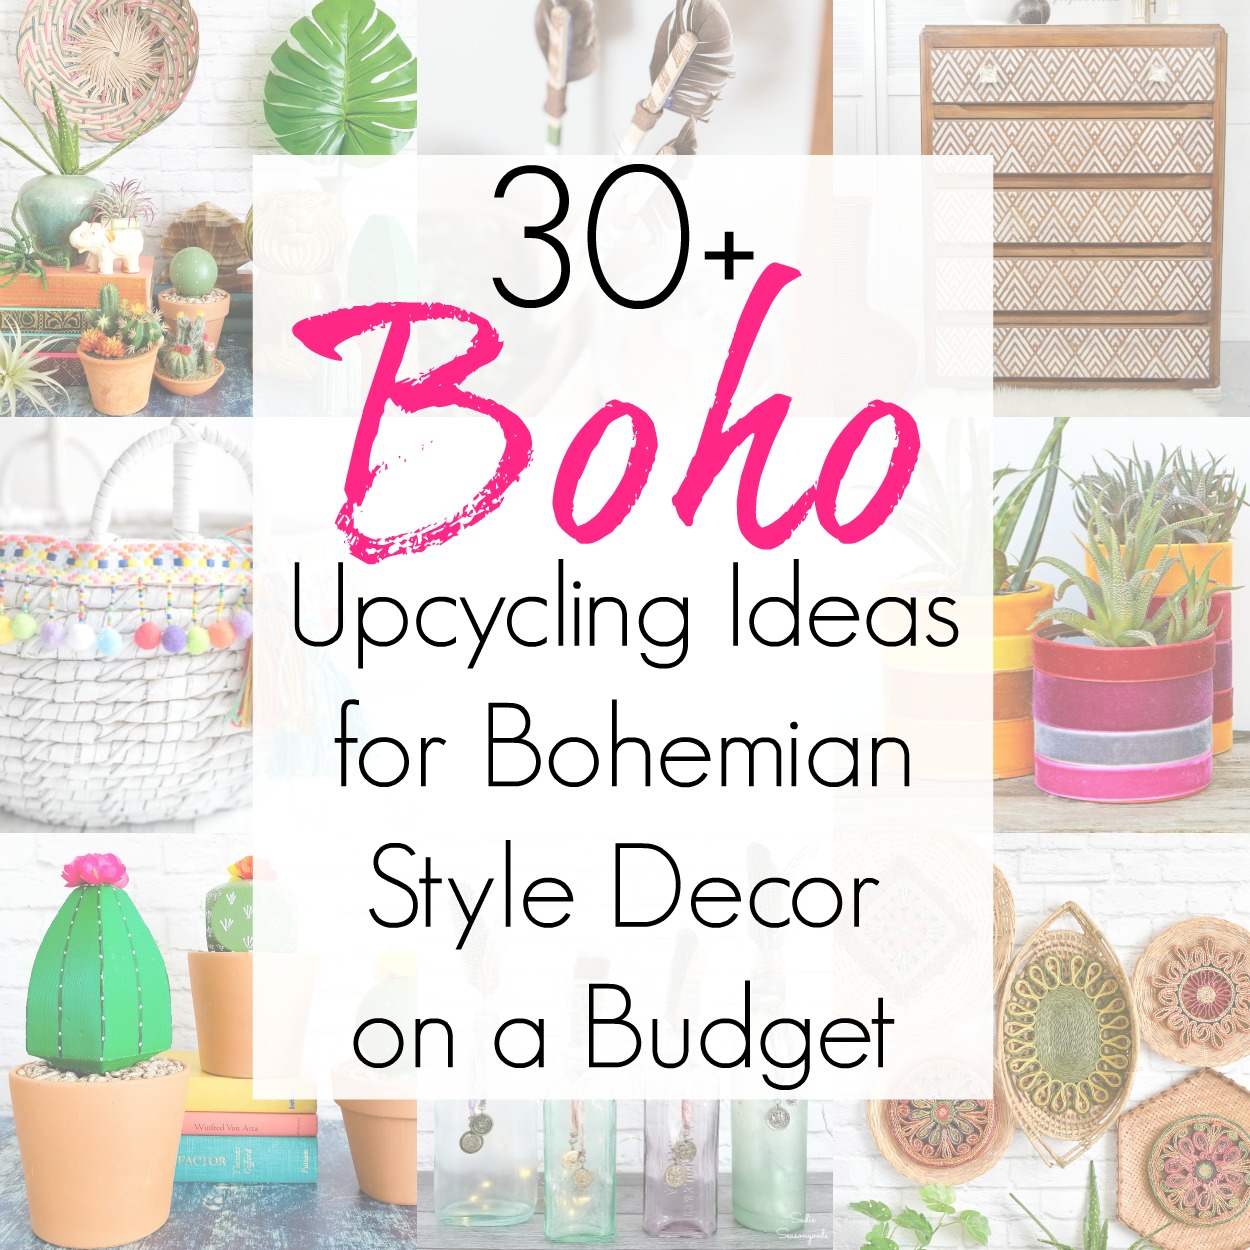 Upcycling Projects and Ideas for Bohemian Style Decor